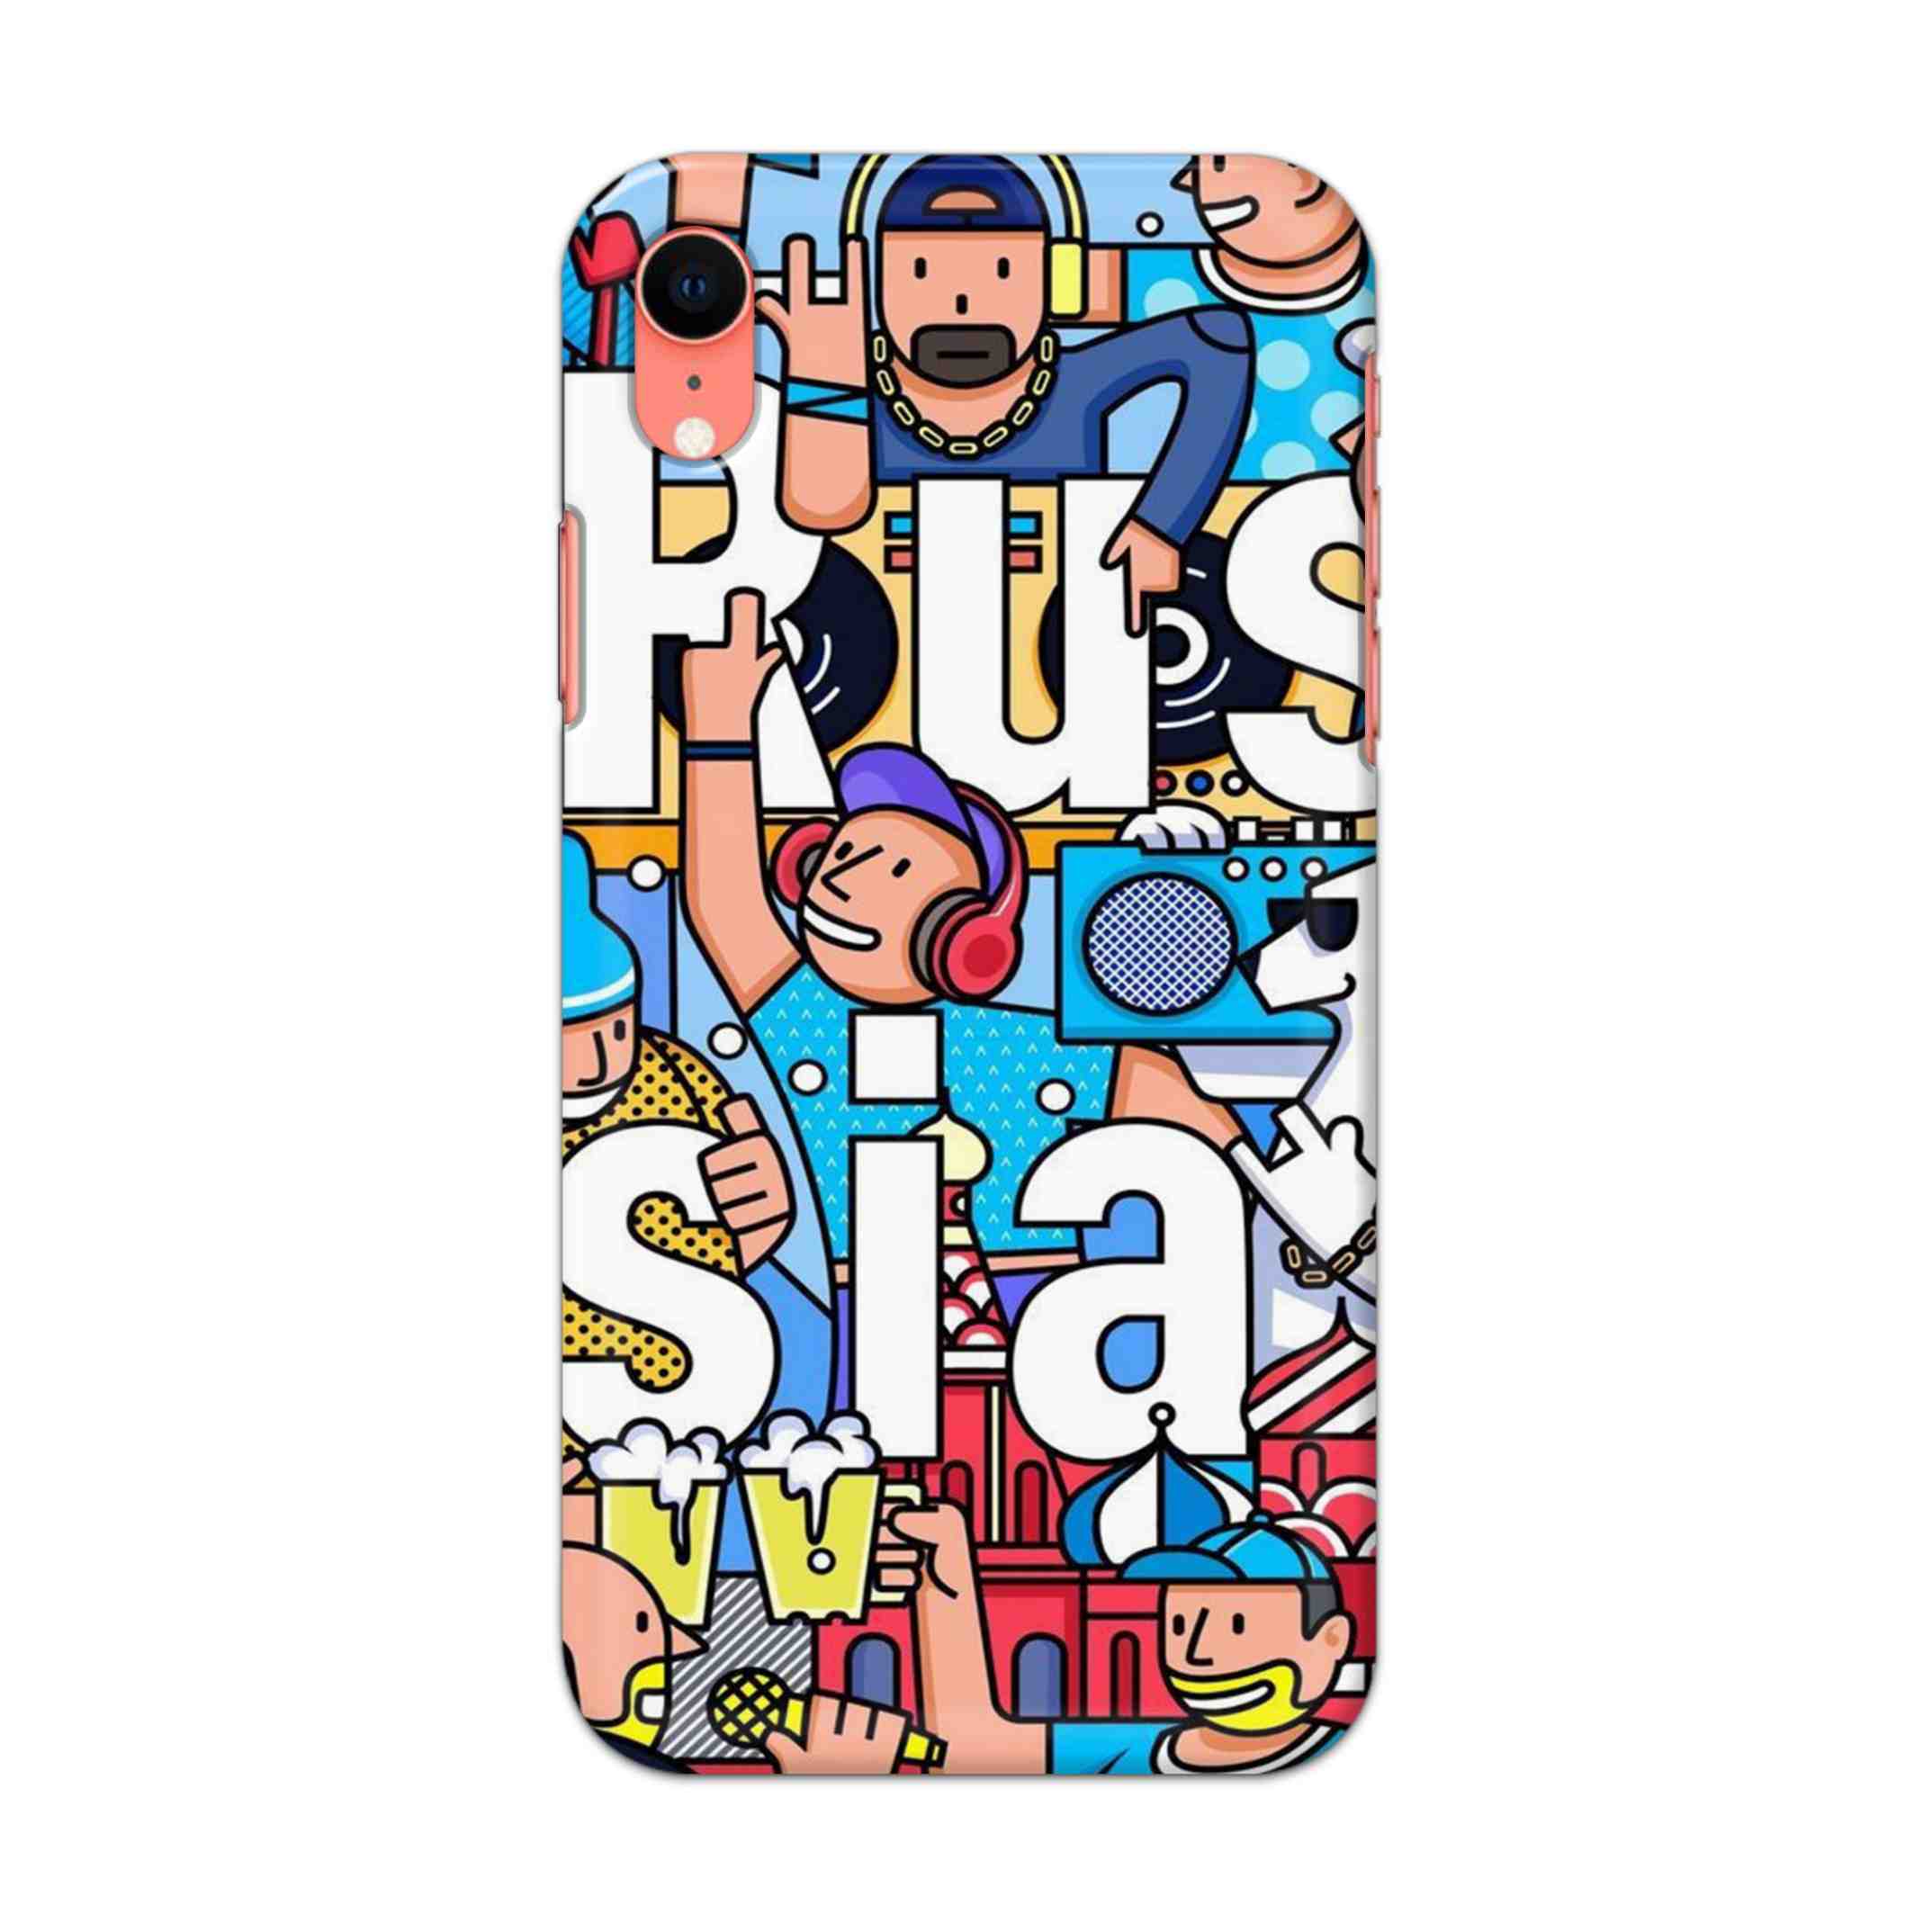 Buy Russia Hard Back Mobile Phone Case/Cover For iPhone XR Online